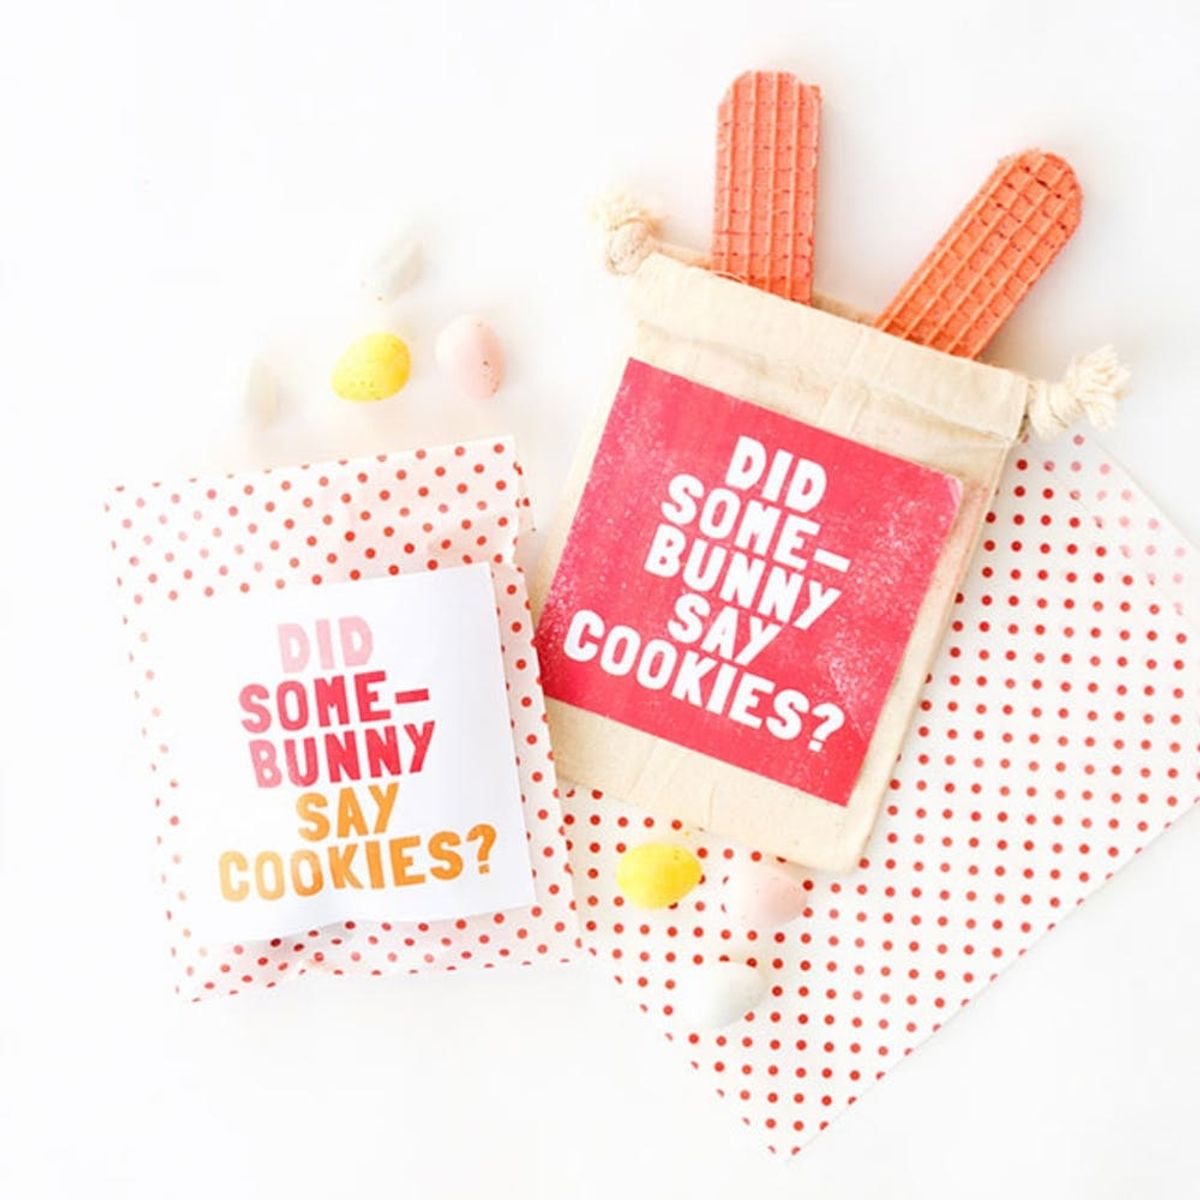 20 Modern Party Favors to DIY for Your Easter Brunch